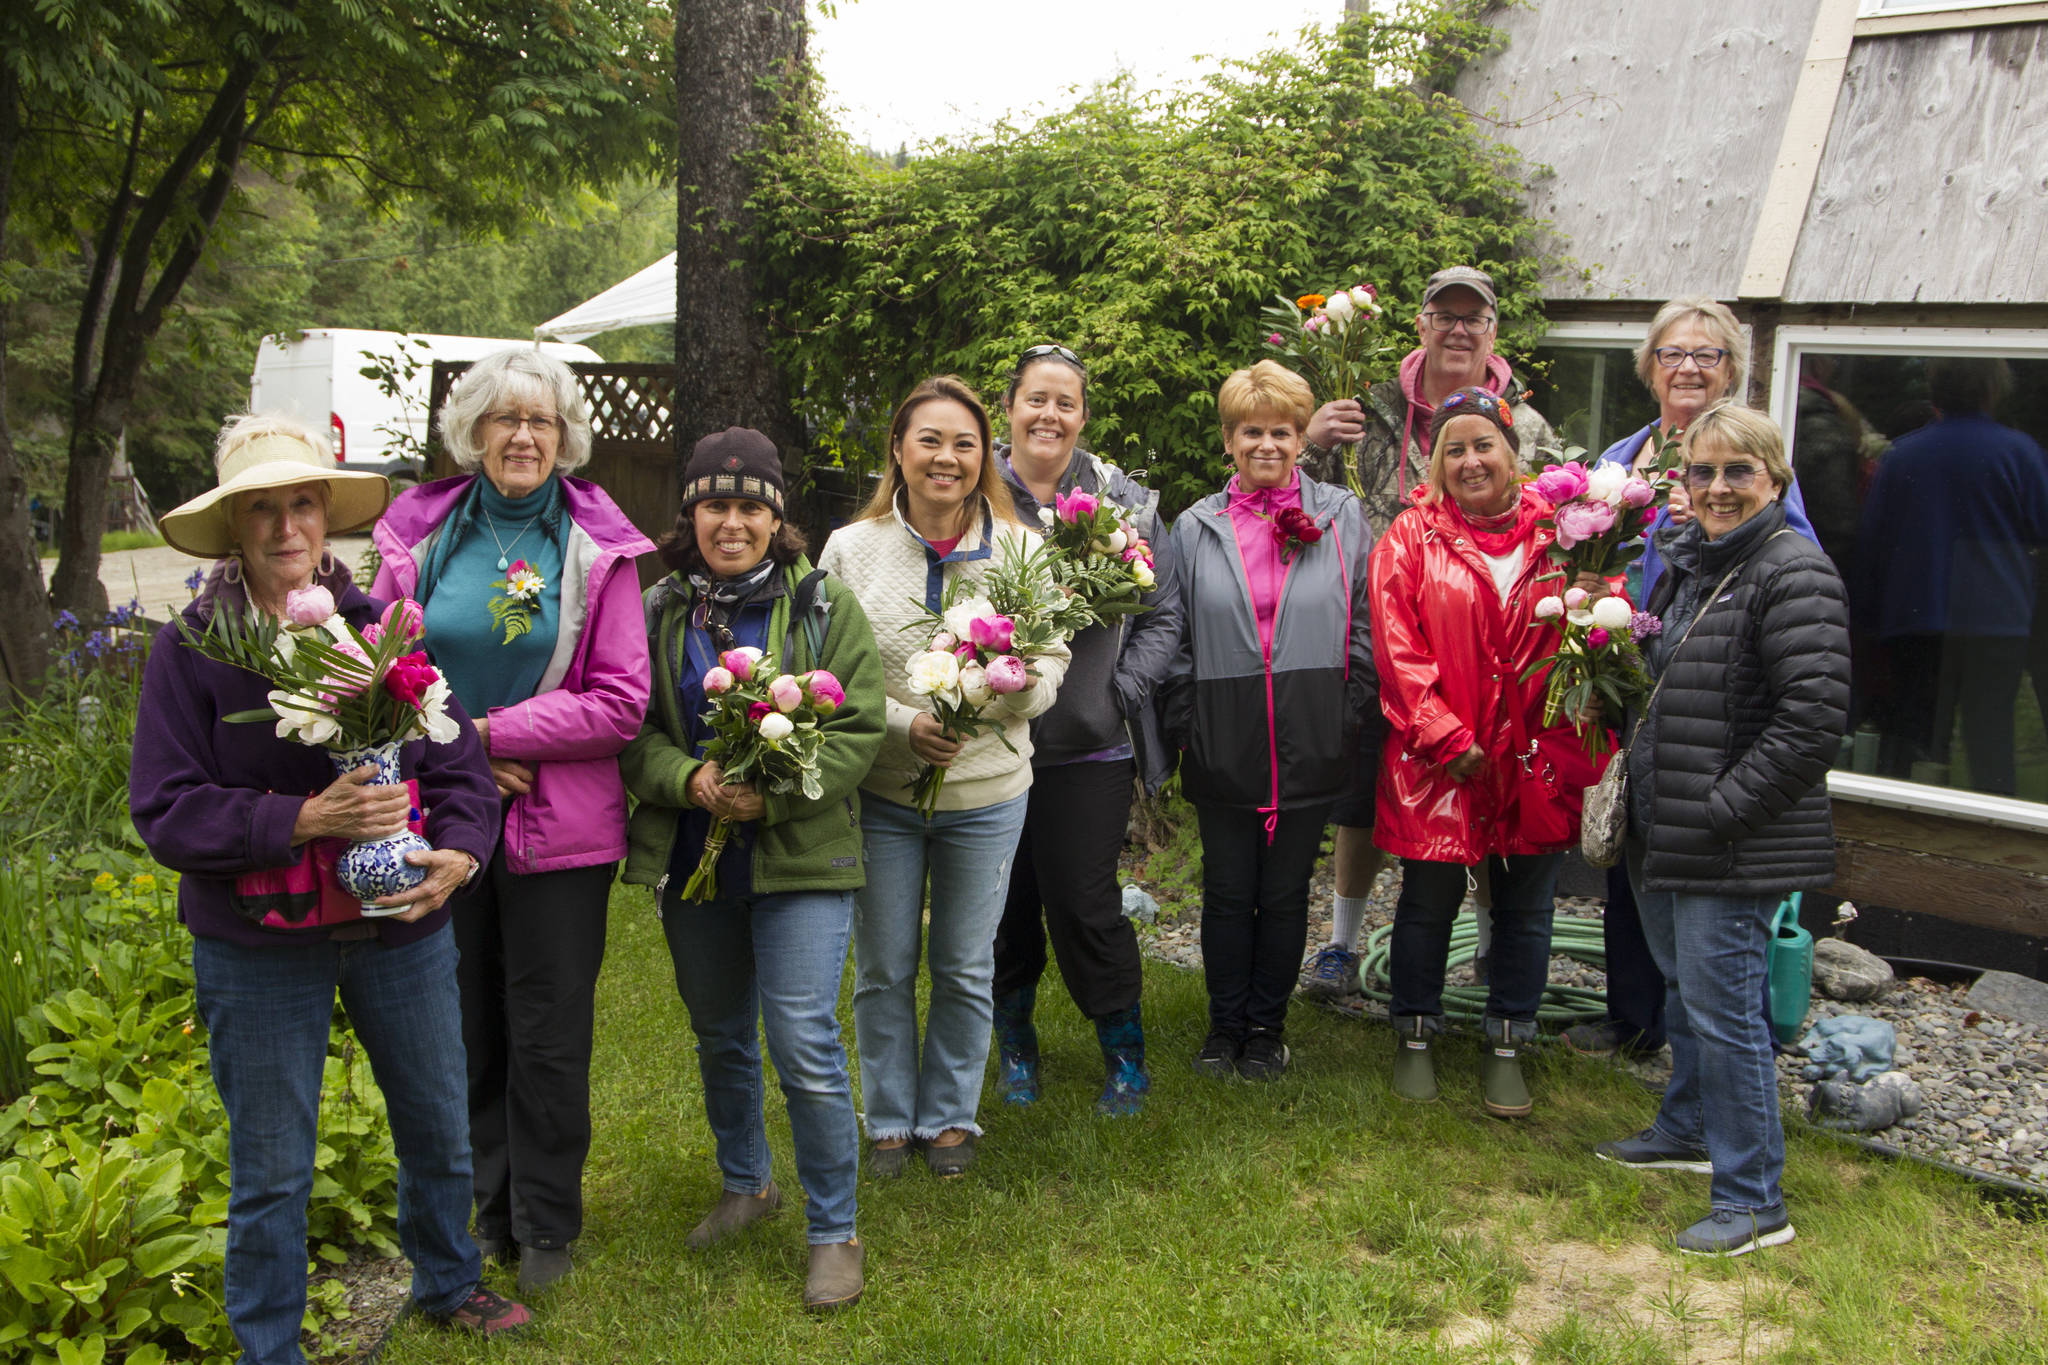 The Alaska Beautiful Peony farm hosted a tour and bouquet class as a part of the second annual Homer Peony Celebration. The group proudly showed off their finished bouquets. (Photo by Sarah Knapp/Homer News)
The Alaska Beautiful Peony farm hosted a tour and bouquet class as a part of the second annual Homer Peony Celebration. The group proudly showed off their finished bouquets. (Photo by Sarah Knapp/Homer News)